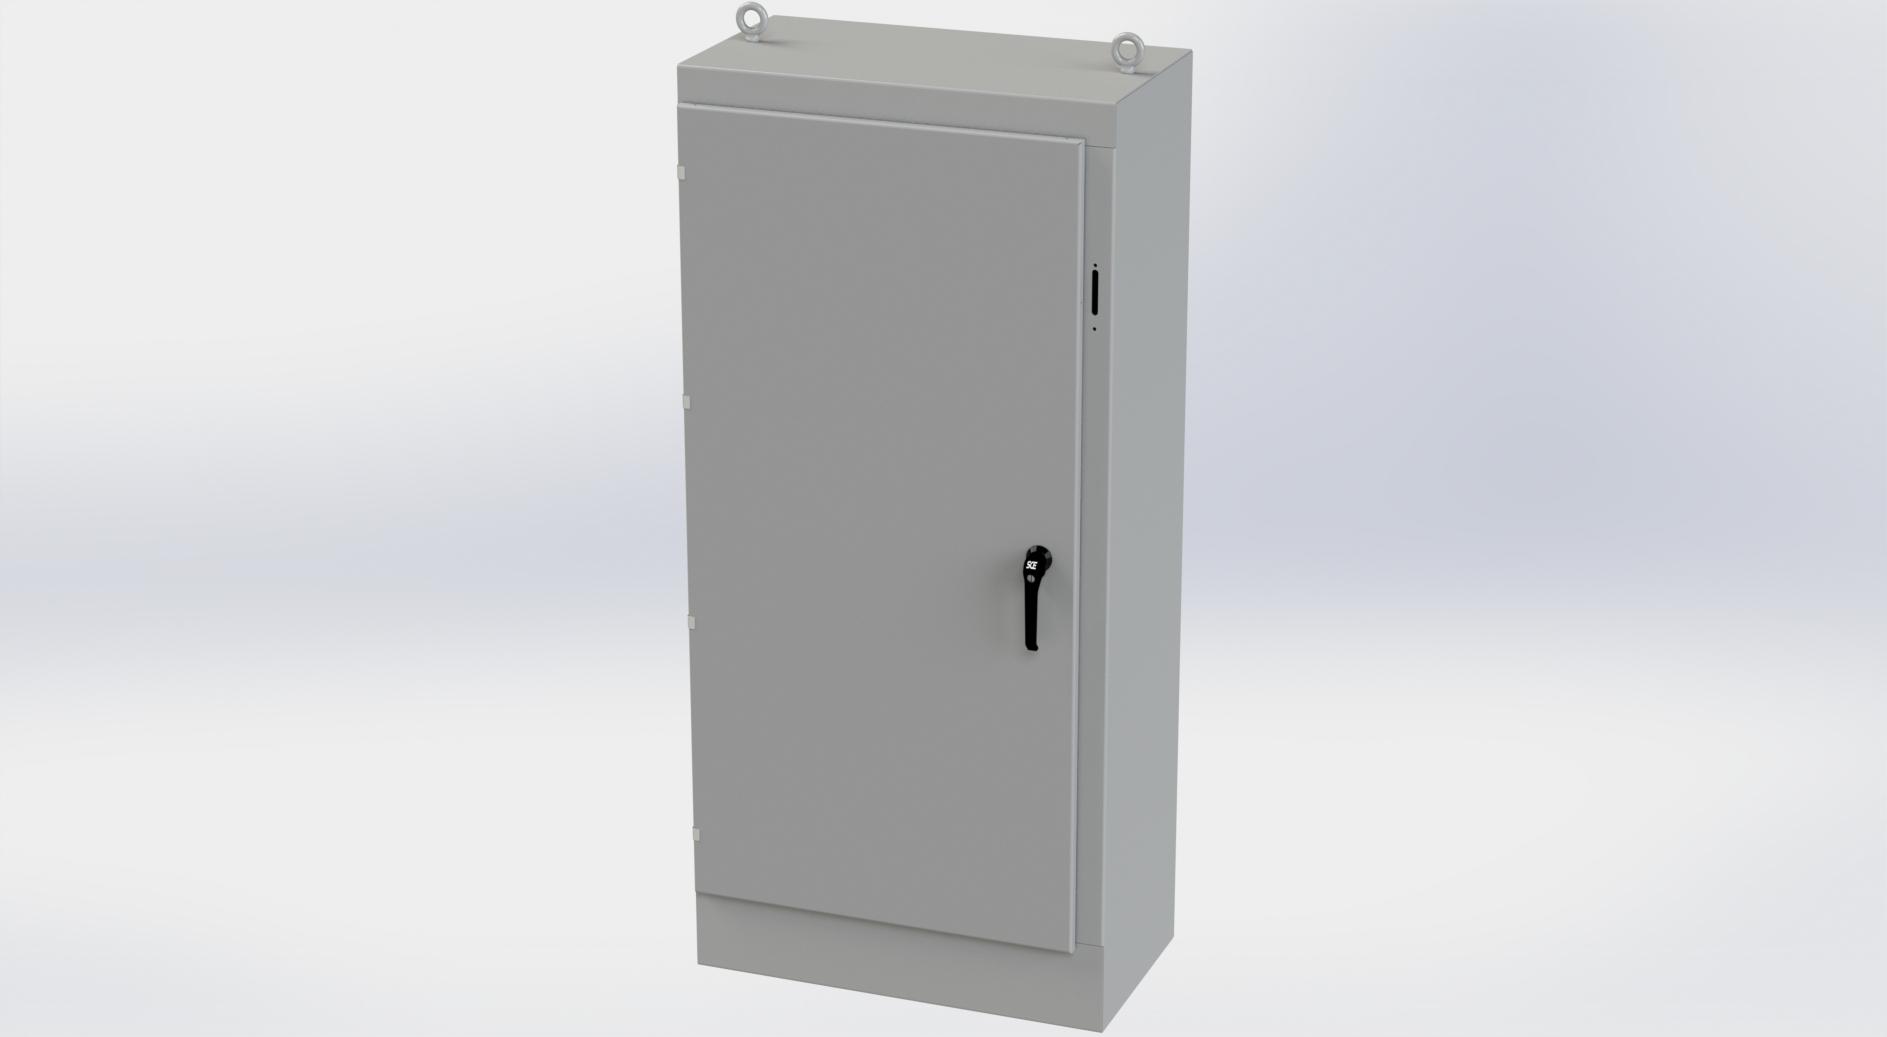 Saginaw Control SCE-72XM3418G 1DR XM Enclosure, Height:72.00", Width:33.50", Depth:18.00", ANSI-61 gray powder coating inside and out. Sub-panels are powder coated white.  